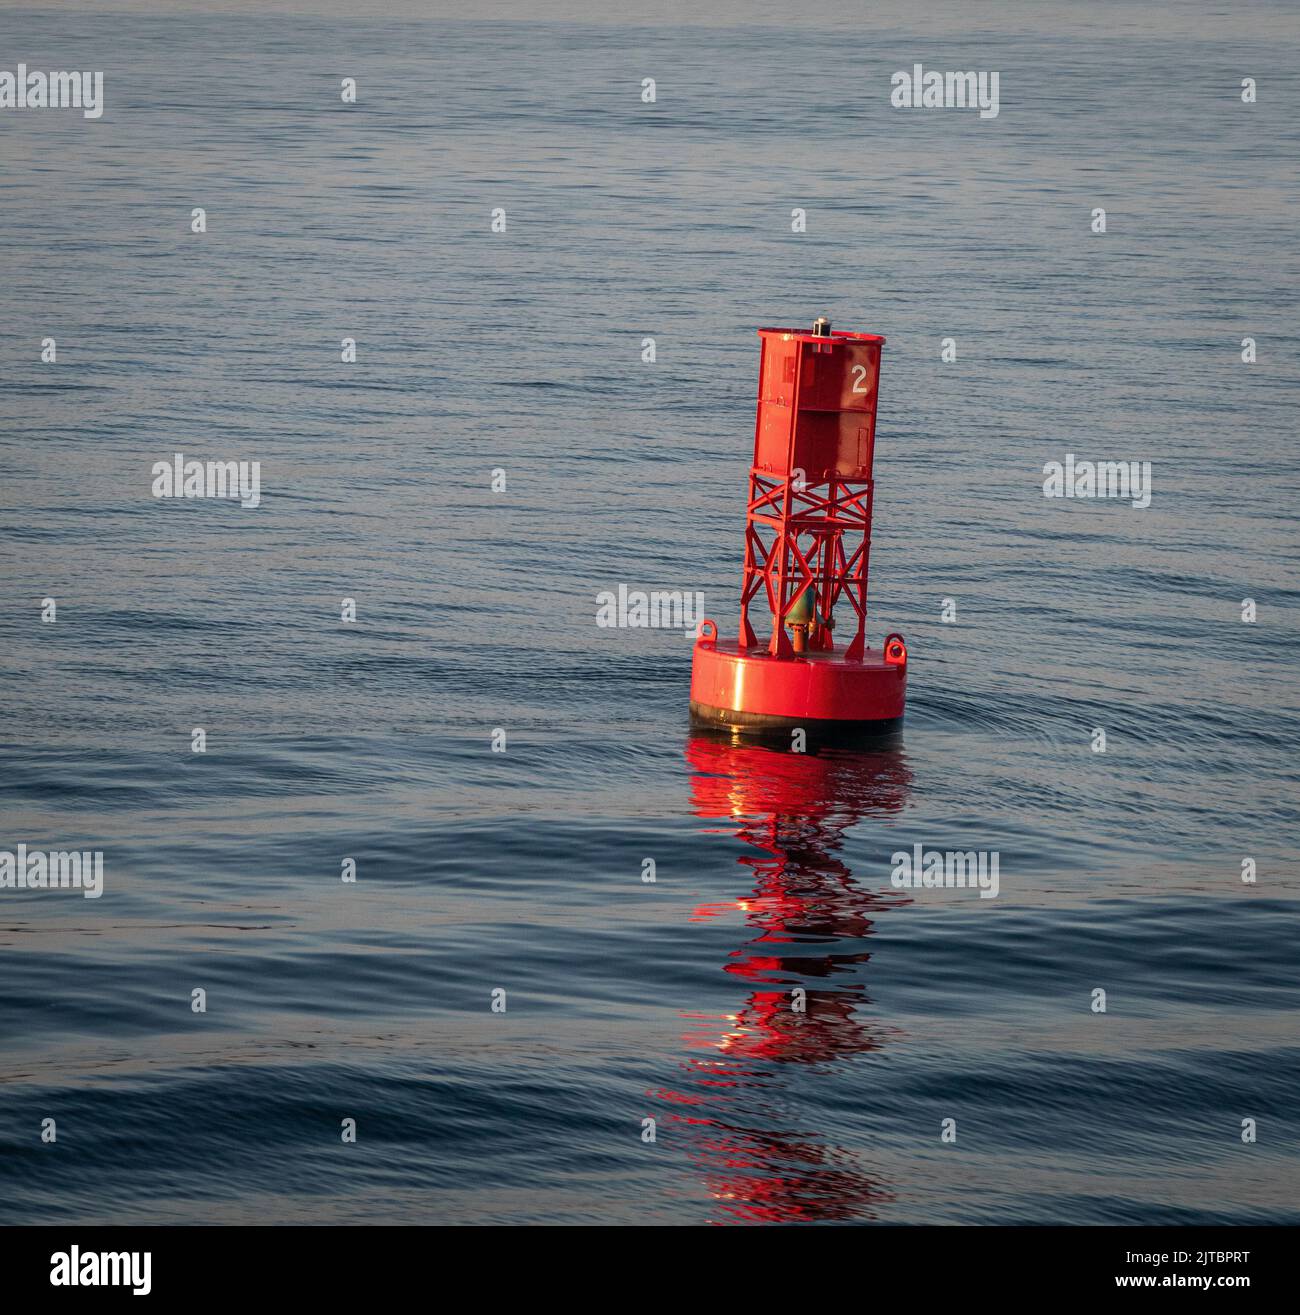 A red buoy off the coast of Cape Cod Stock Photo